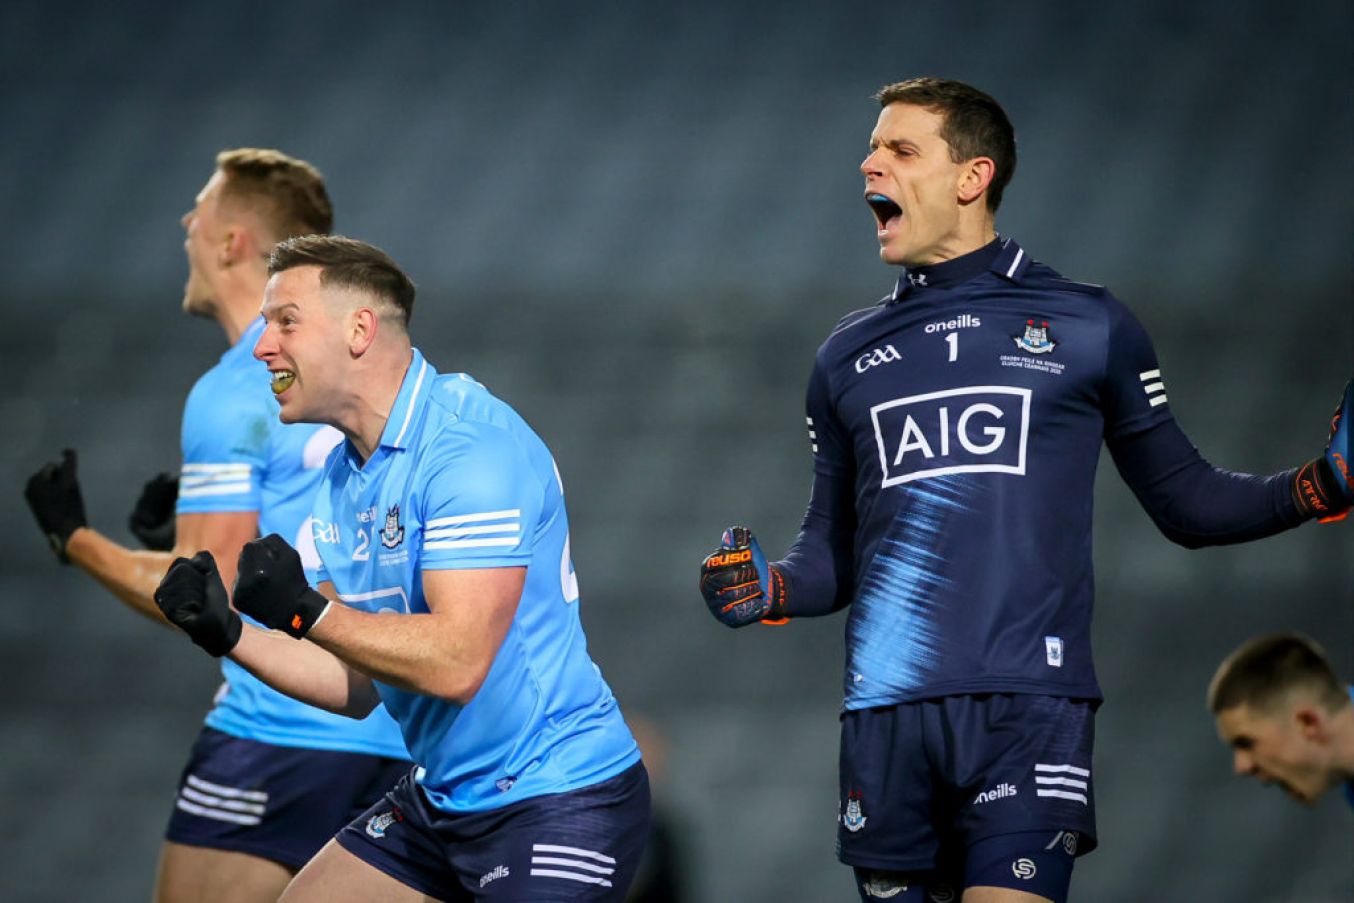 Dublin's Philly Mcmahon And Stephen Cluxton Celebrate At The Final Whistle. Credit ©Inpho/James Crombie